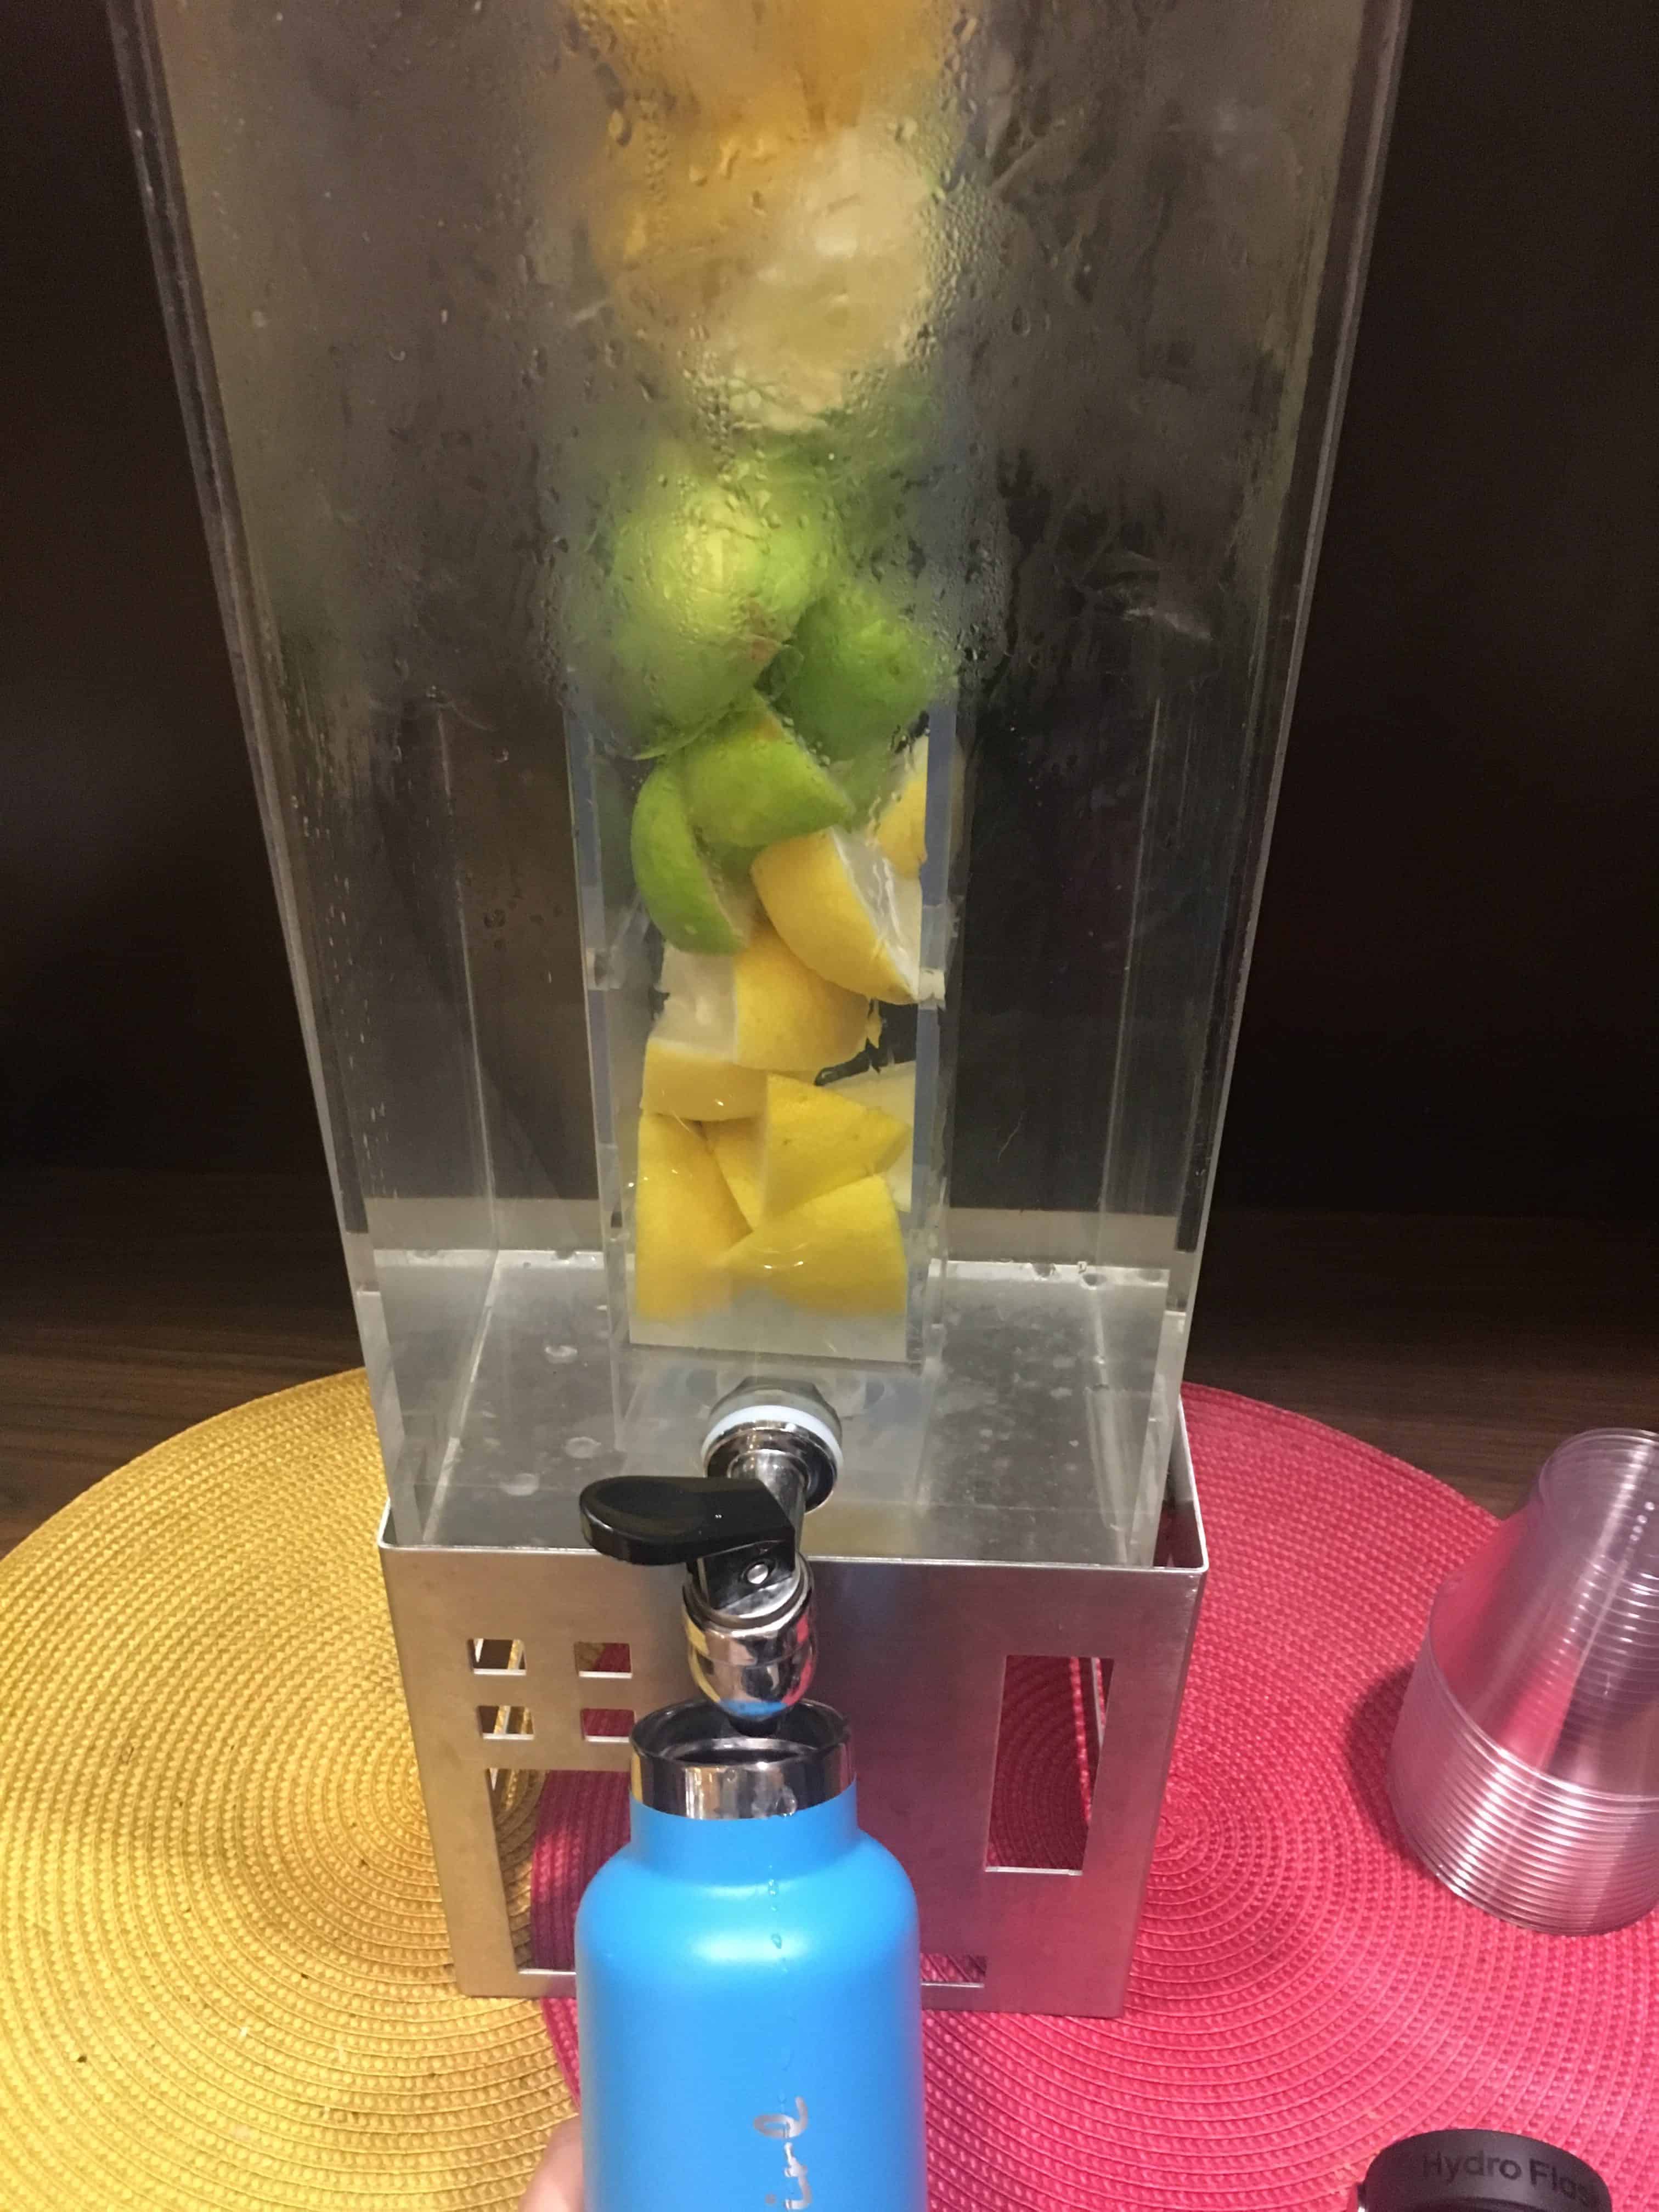 Photo showing author filling blue hydroflask water bottle with water infused with fresh lemons and limes at a Marriott Residence Inn. https://trimazing.com/